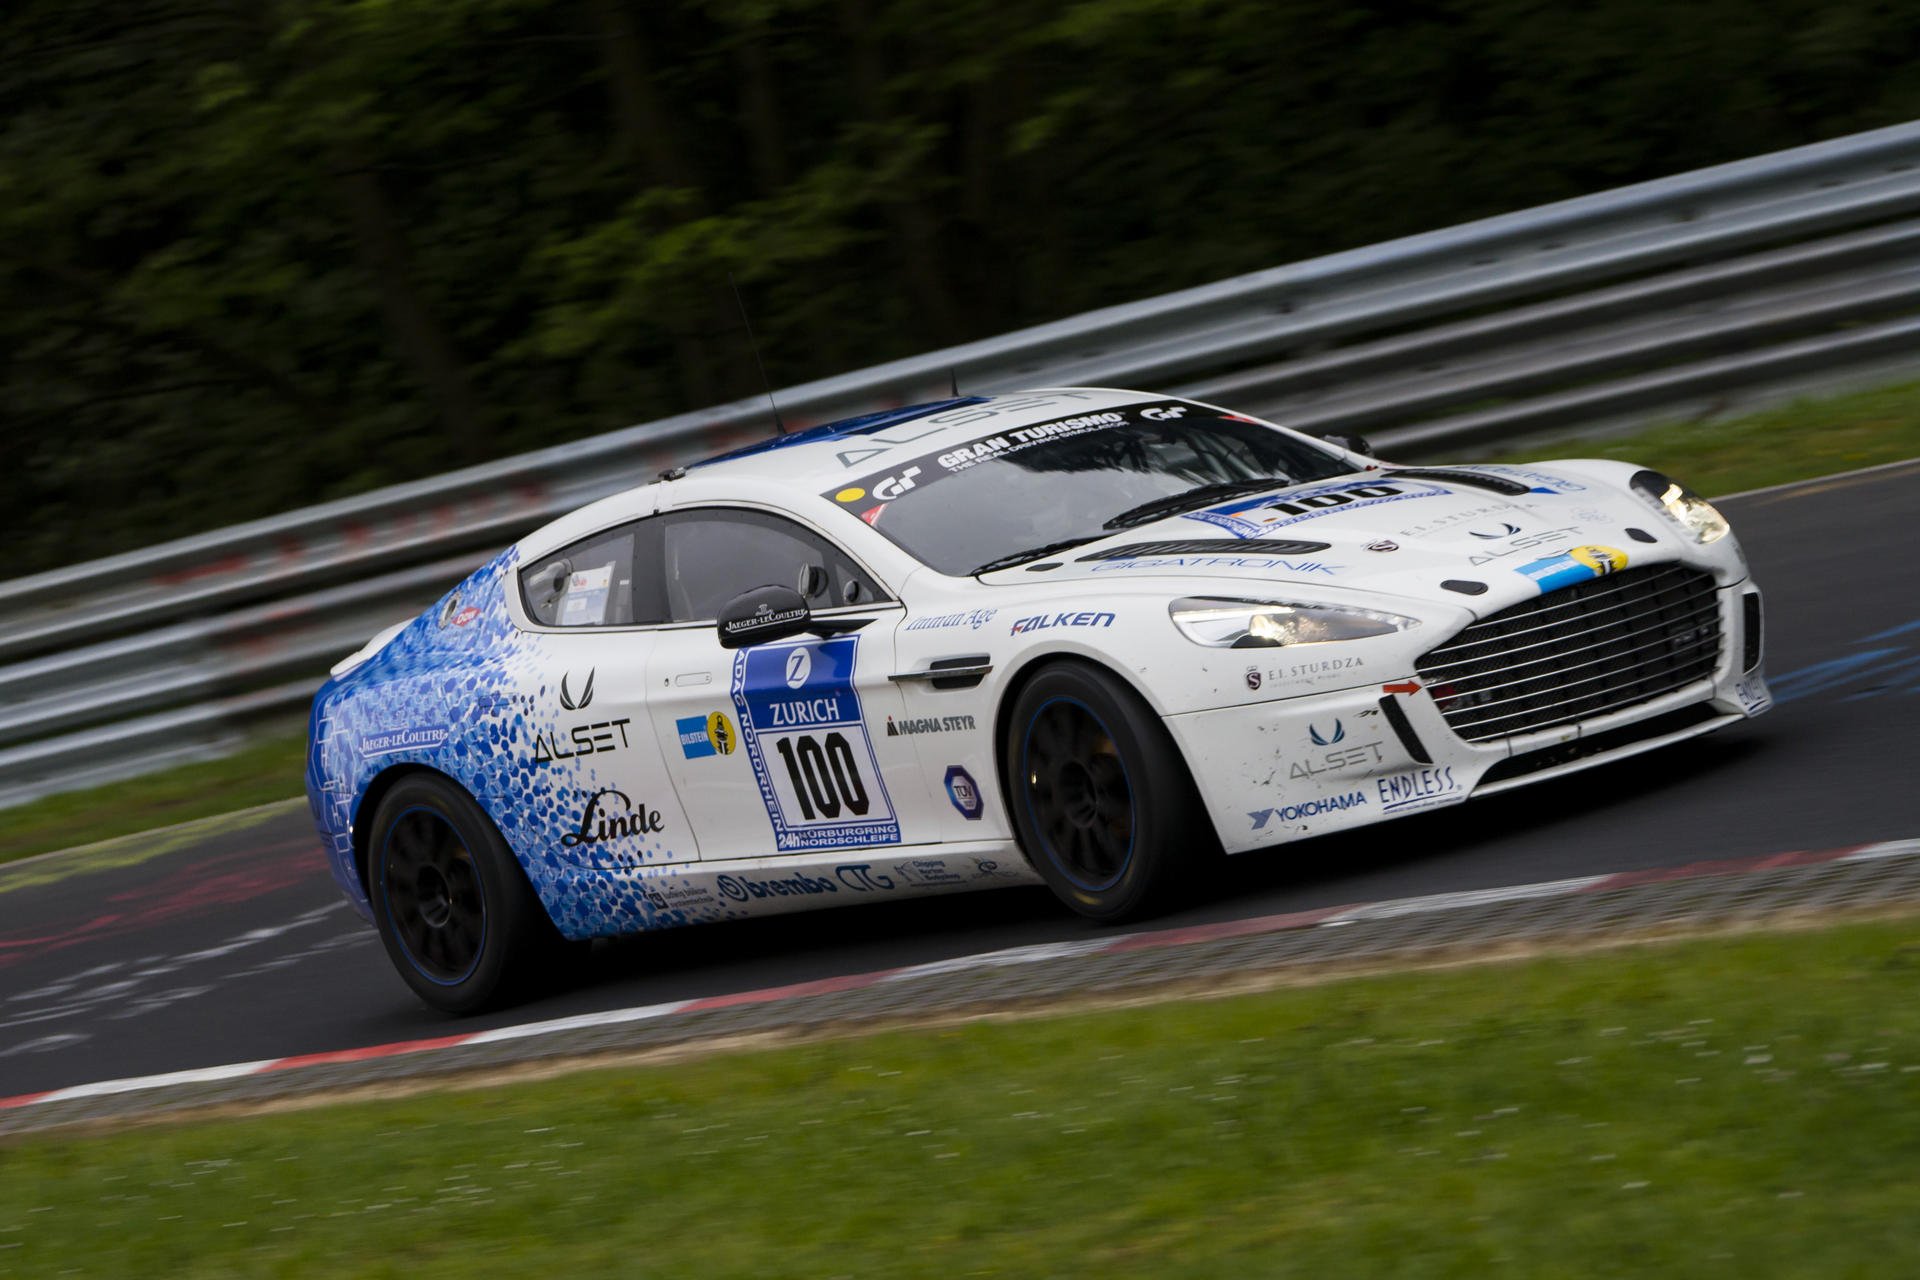 The Aston Martin Hybrid Hydrogen Rapide S in action.